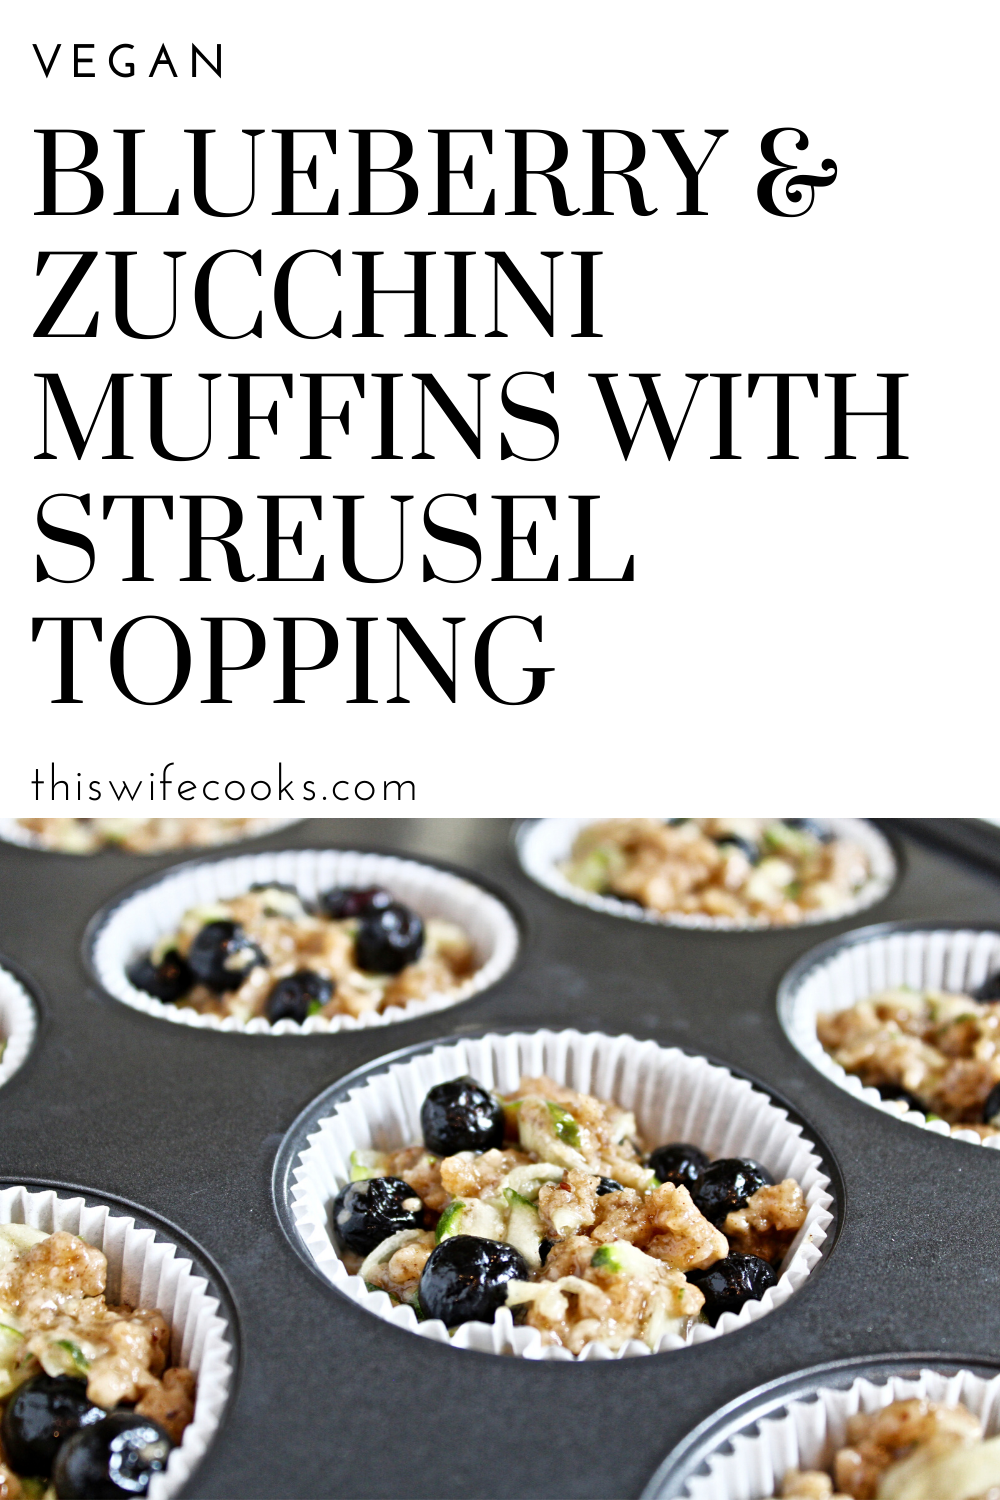 Blueberry and Zucchini Muffins with Streusel Topping - Sweet and savory flavors of the season shine in these quick easy vegan blueberry zucchini muffins that are perfect for breakfast or snacking! via @thiswifecooks